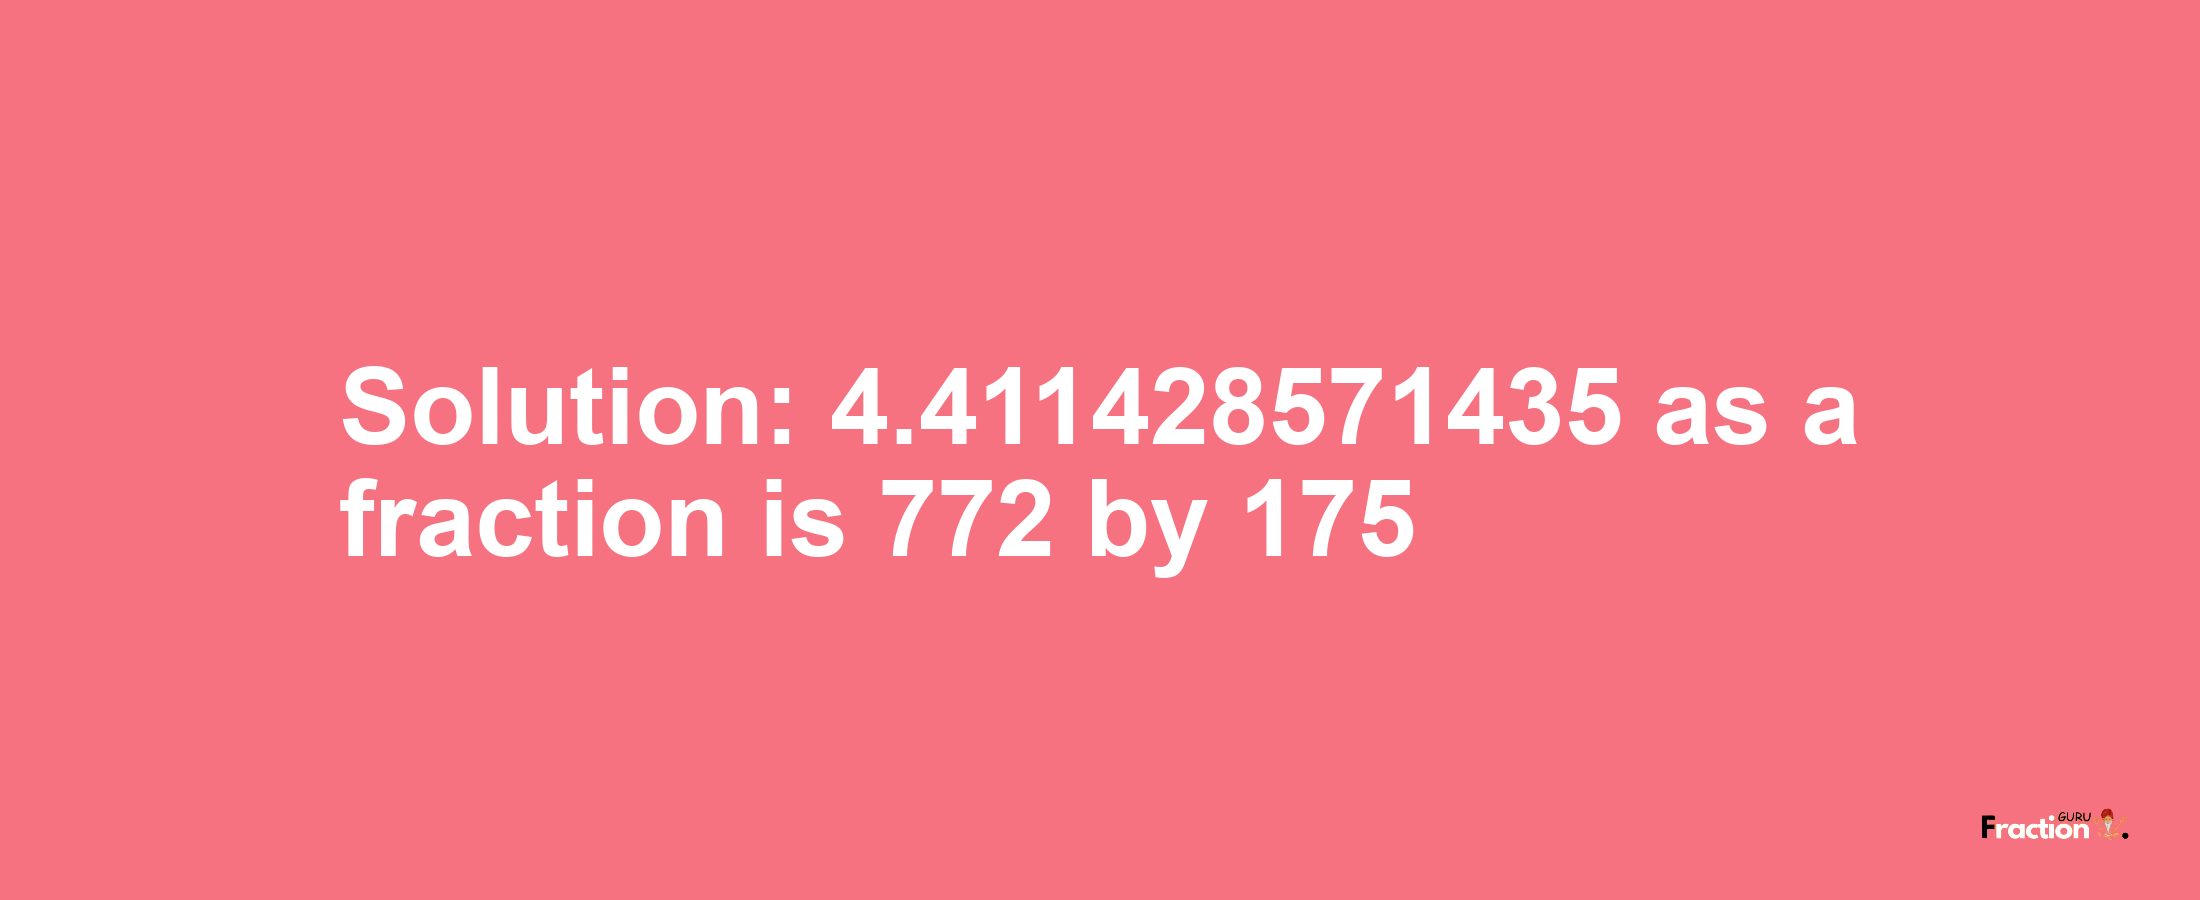 Solution:4.411428571435 as a fraction is 772/175